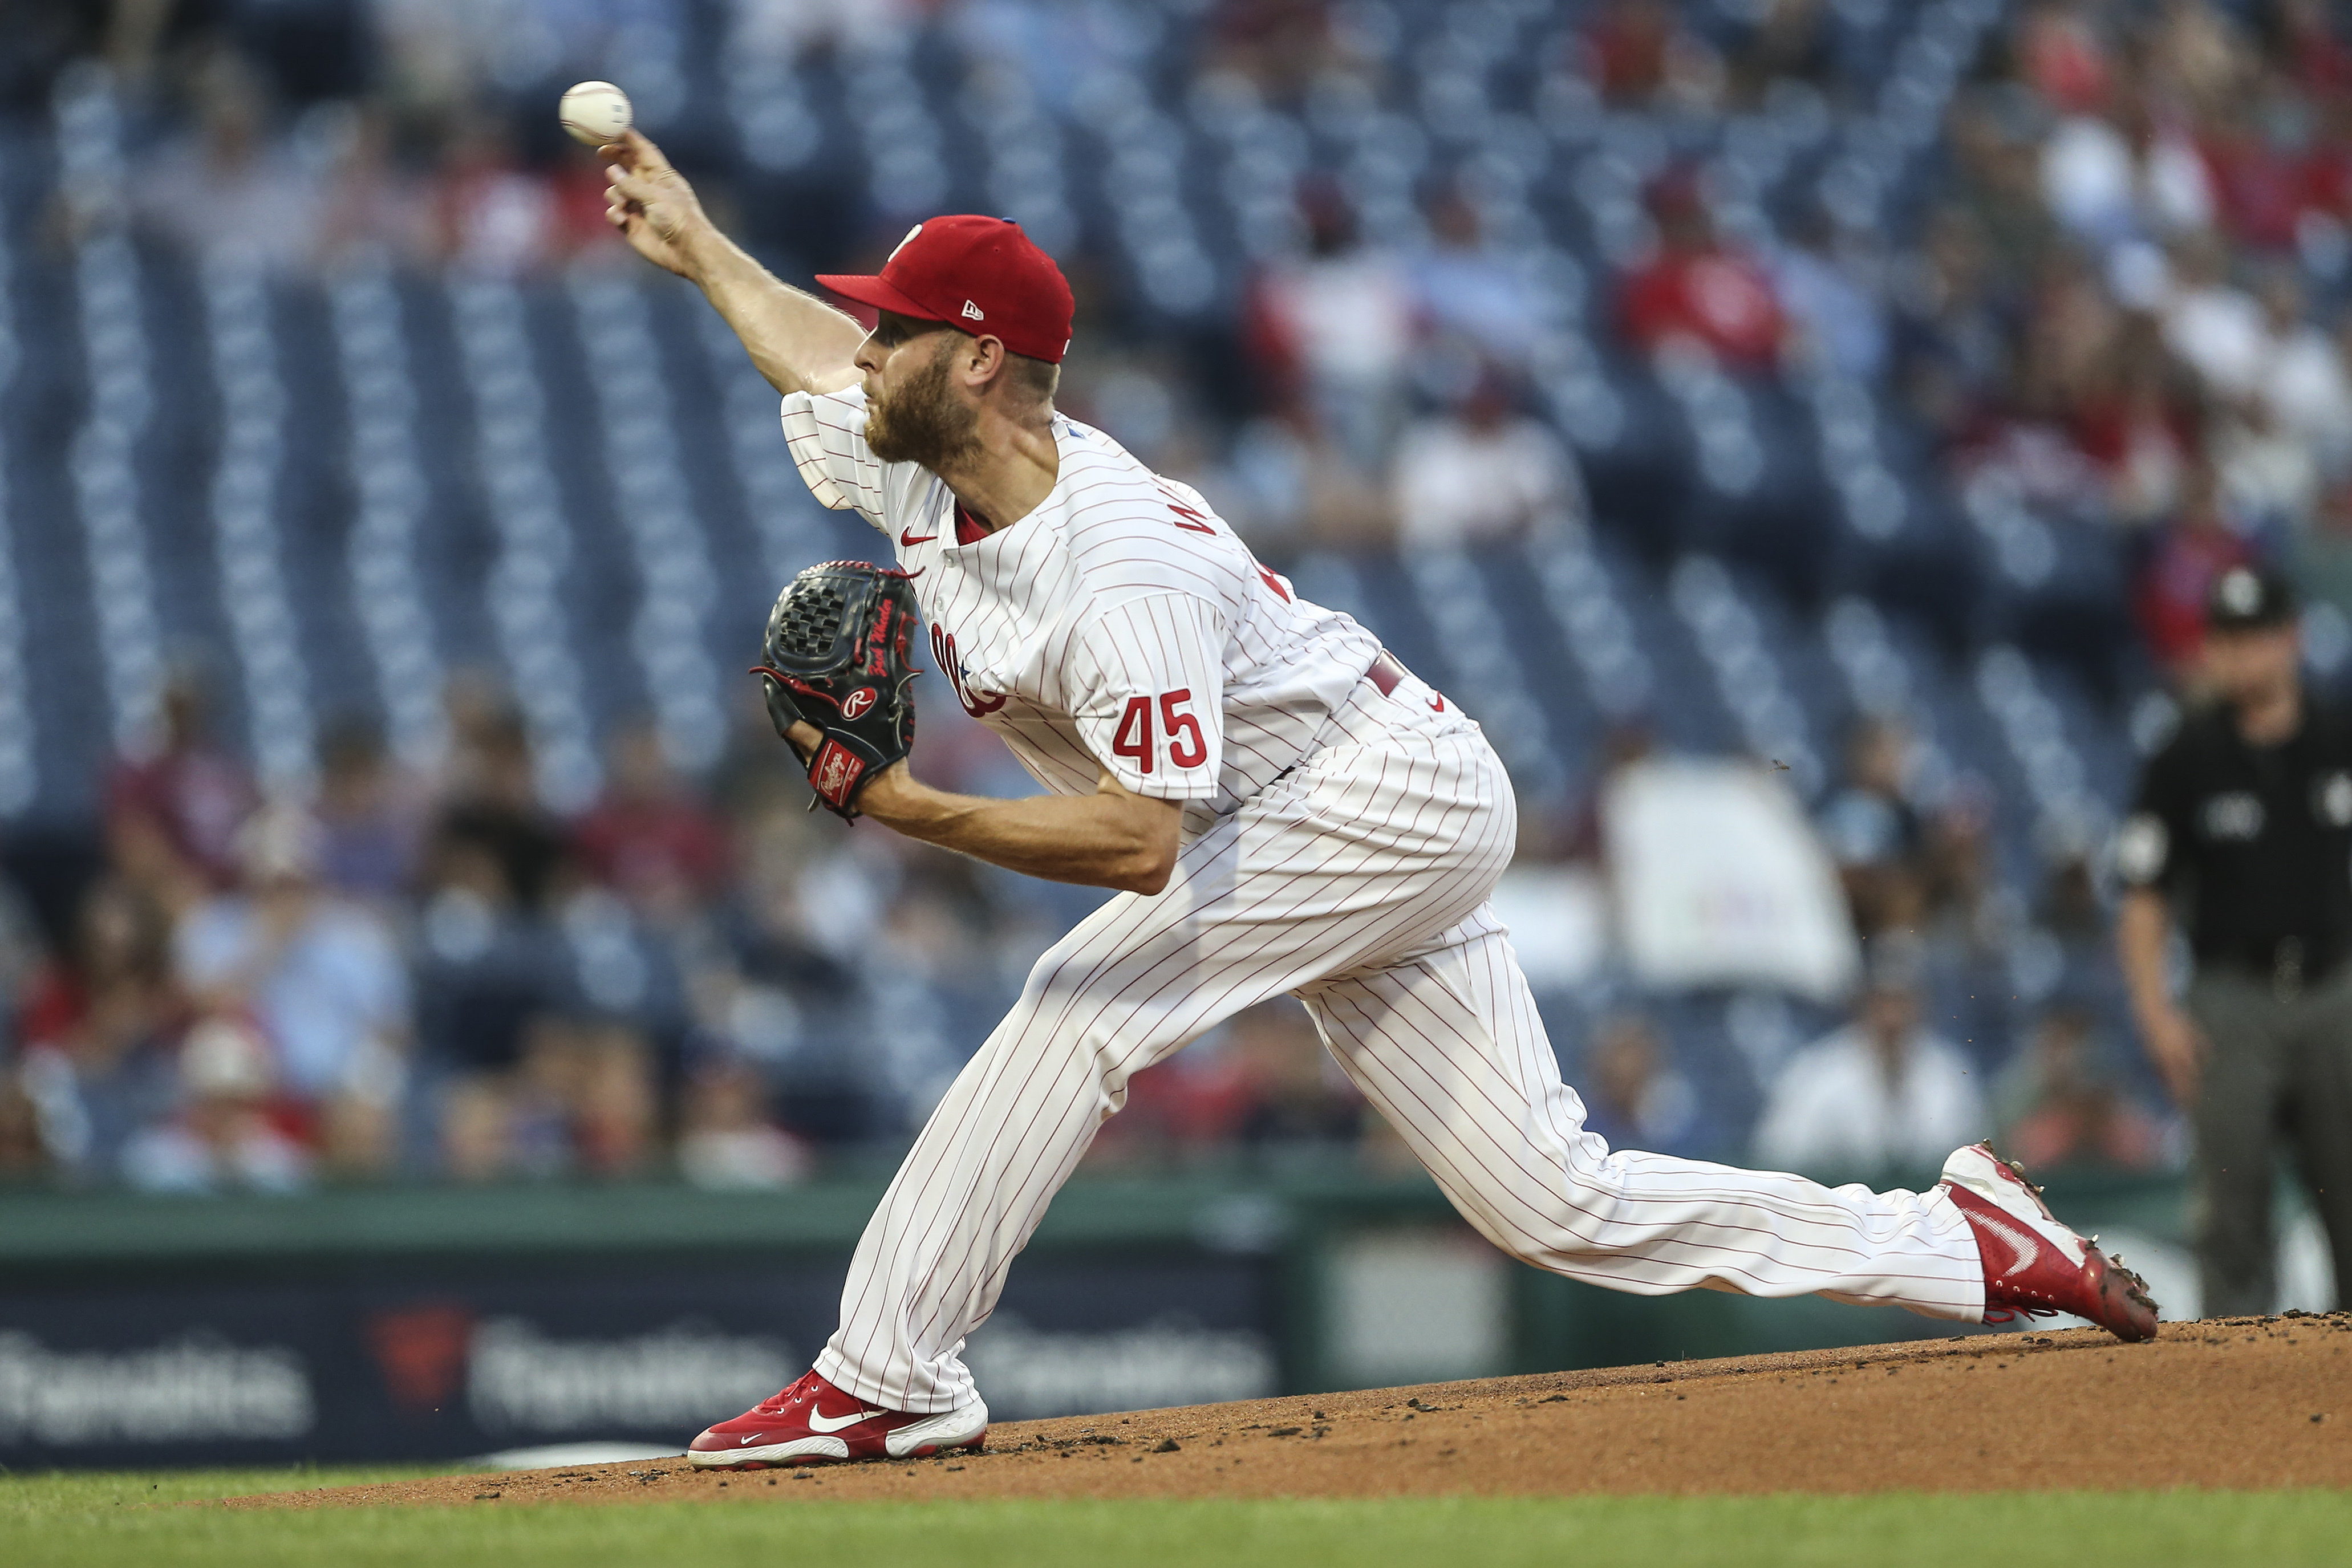 Join Baseball Prospectus for a night at Citizens Bank Park on